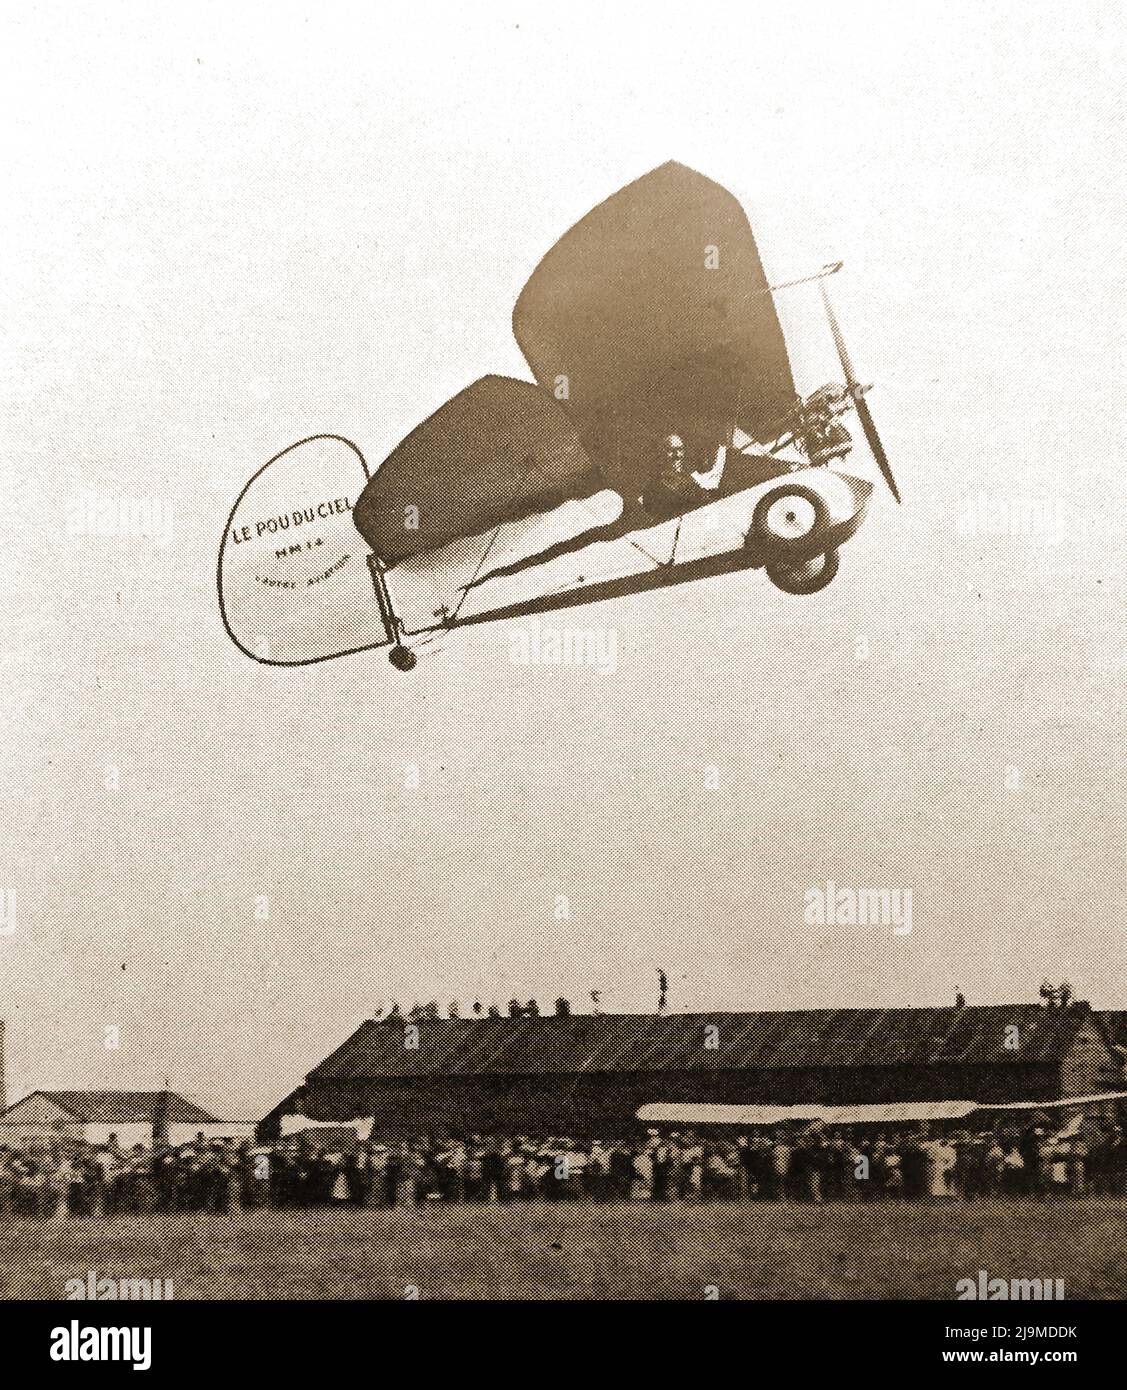 An early photograph of the French built  'Flying Flea'  taking off at an air show.  Also known as  the  Mignet Pou-du-Ciel    or “Louse of the Sky”. it  was   designed by Frenchman Henri Mignet (1893-1965) who  was a French radio engineer. The plane  had  a wingspan of 19.5 feet, a length of 11.5 feet and  weighed   450 pounds -- Mignet Pou-du-Ciel ou avion « Pou du Ciel » conçu par le Français Henri Mignet (1893-1965) qui était ingénieur radio. L’avion avait une envergure de 19,5 pieds, une longueur de 11,5 pieds et pesait 450 livres. Stock Photo